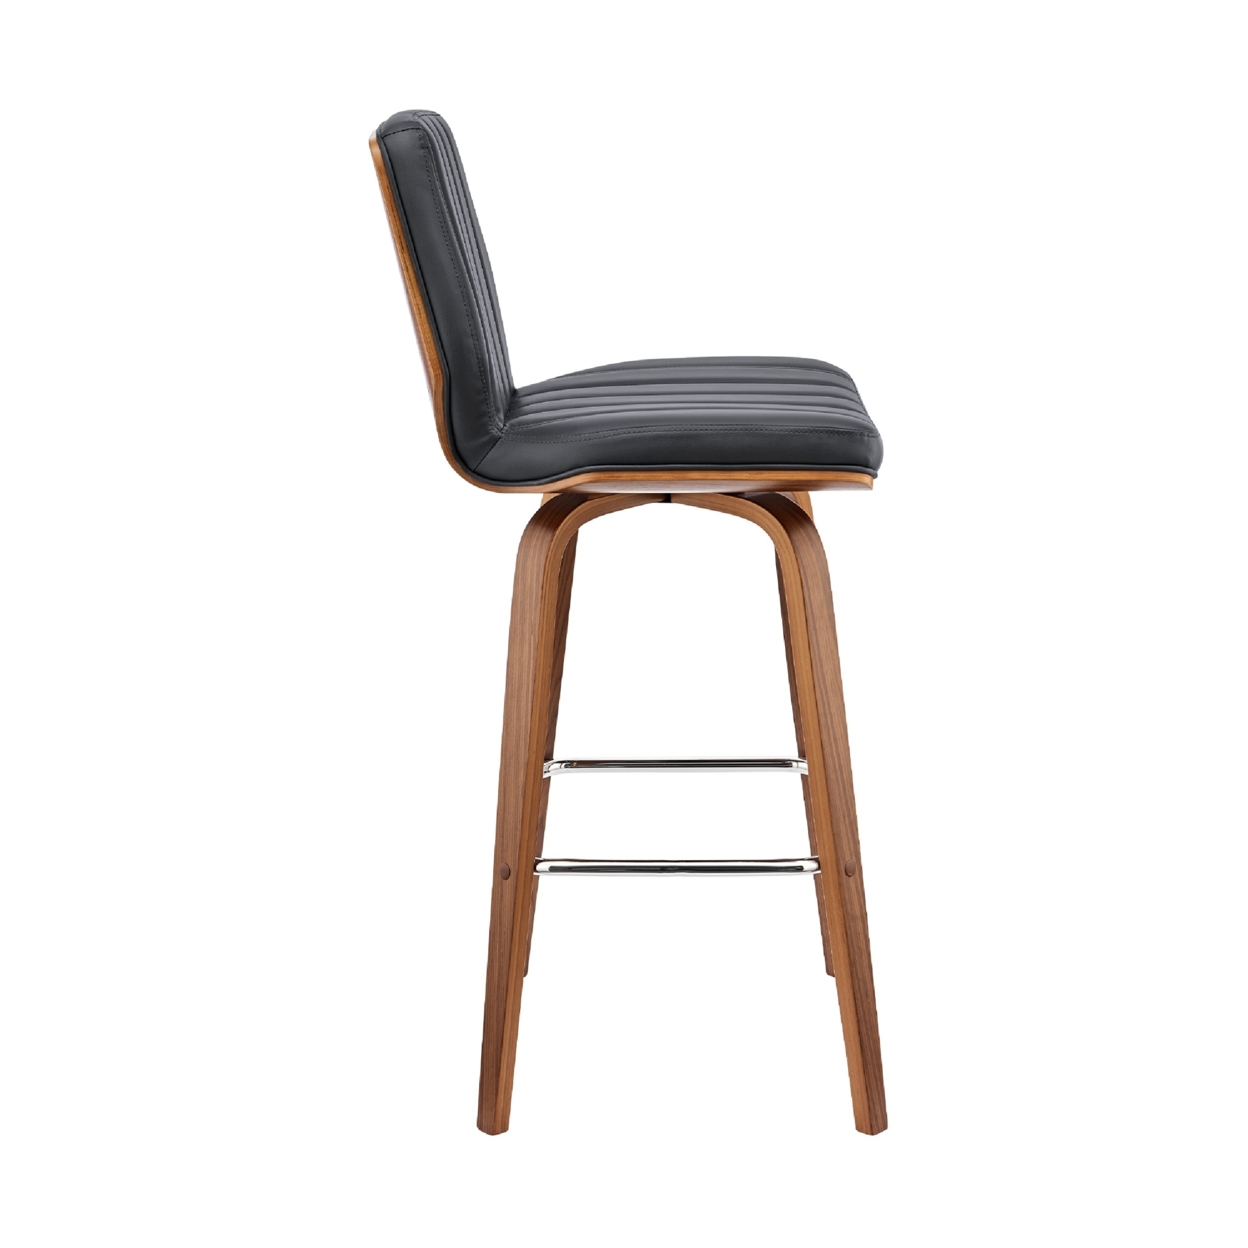 Swivel Barstool With Channel Stitching And Wooden Support, Black And Brown- Saltoro Sherpi